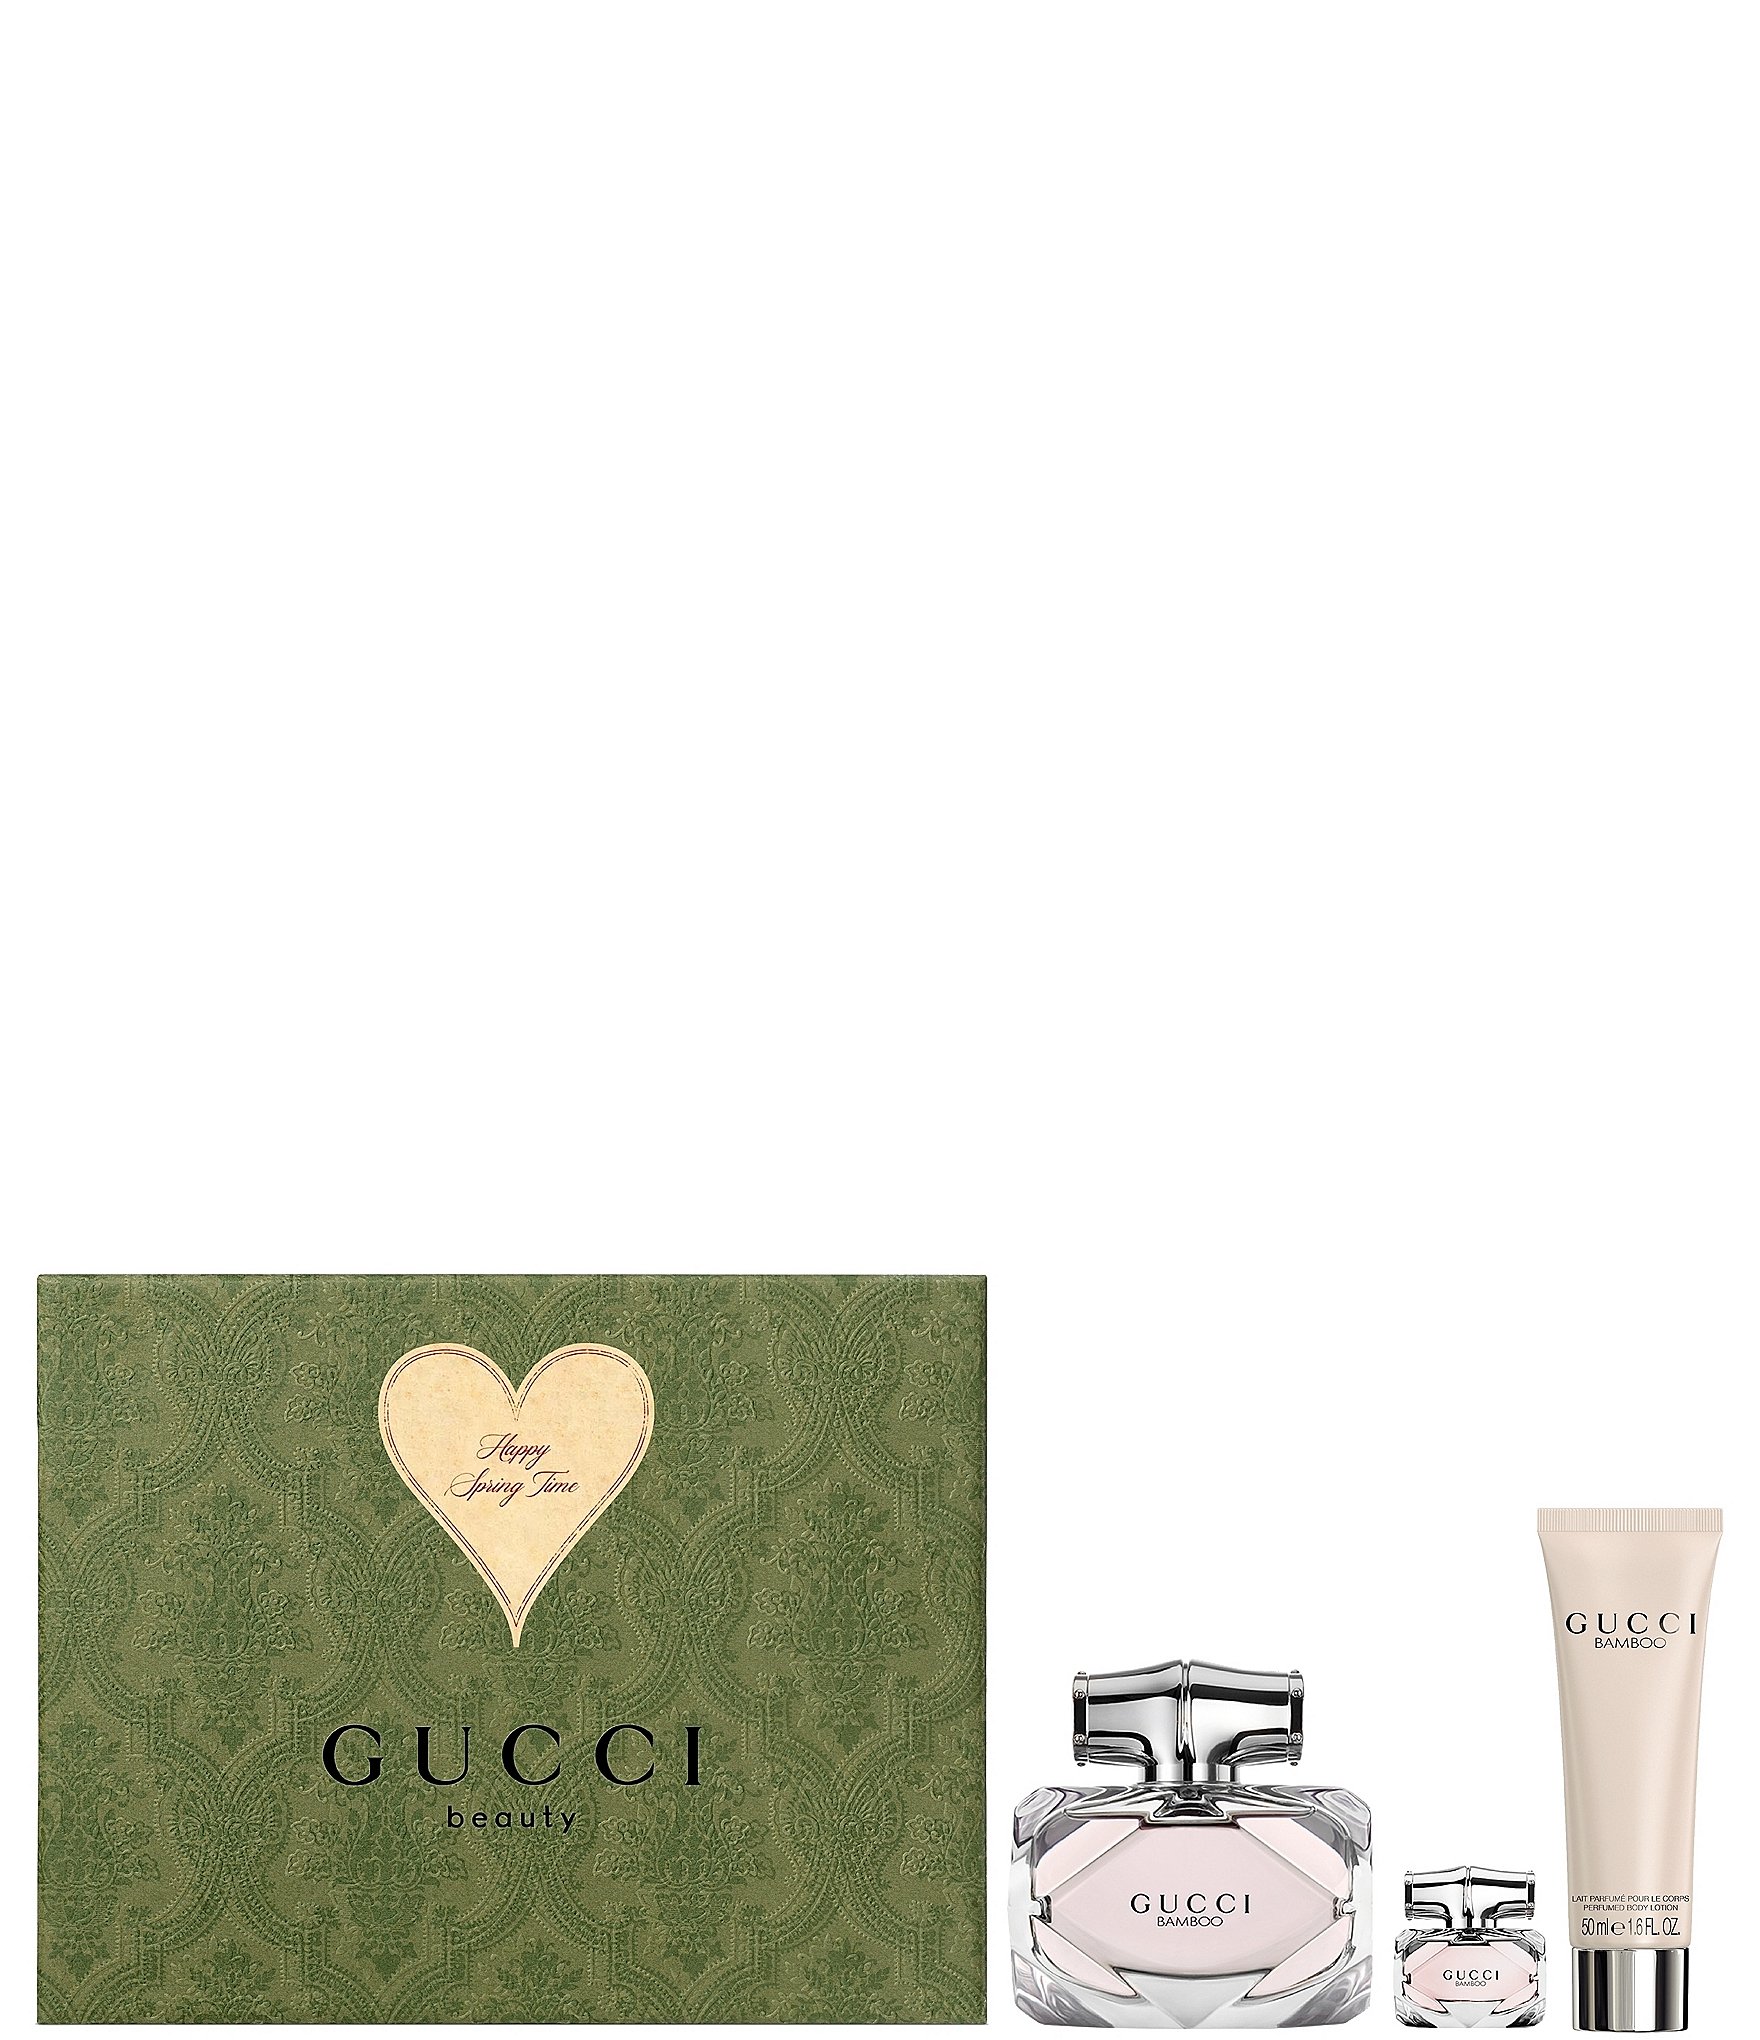 Gucci Women's Perfume & Fragrance Gifts & Value Sets